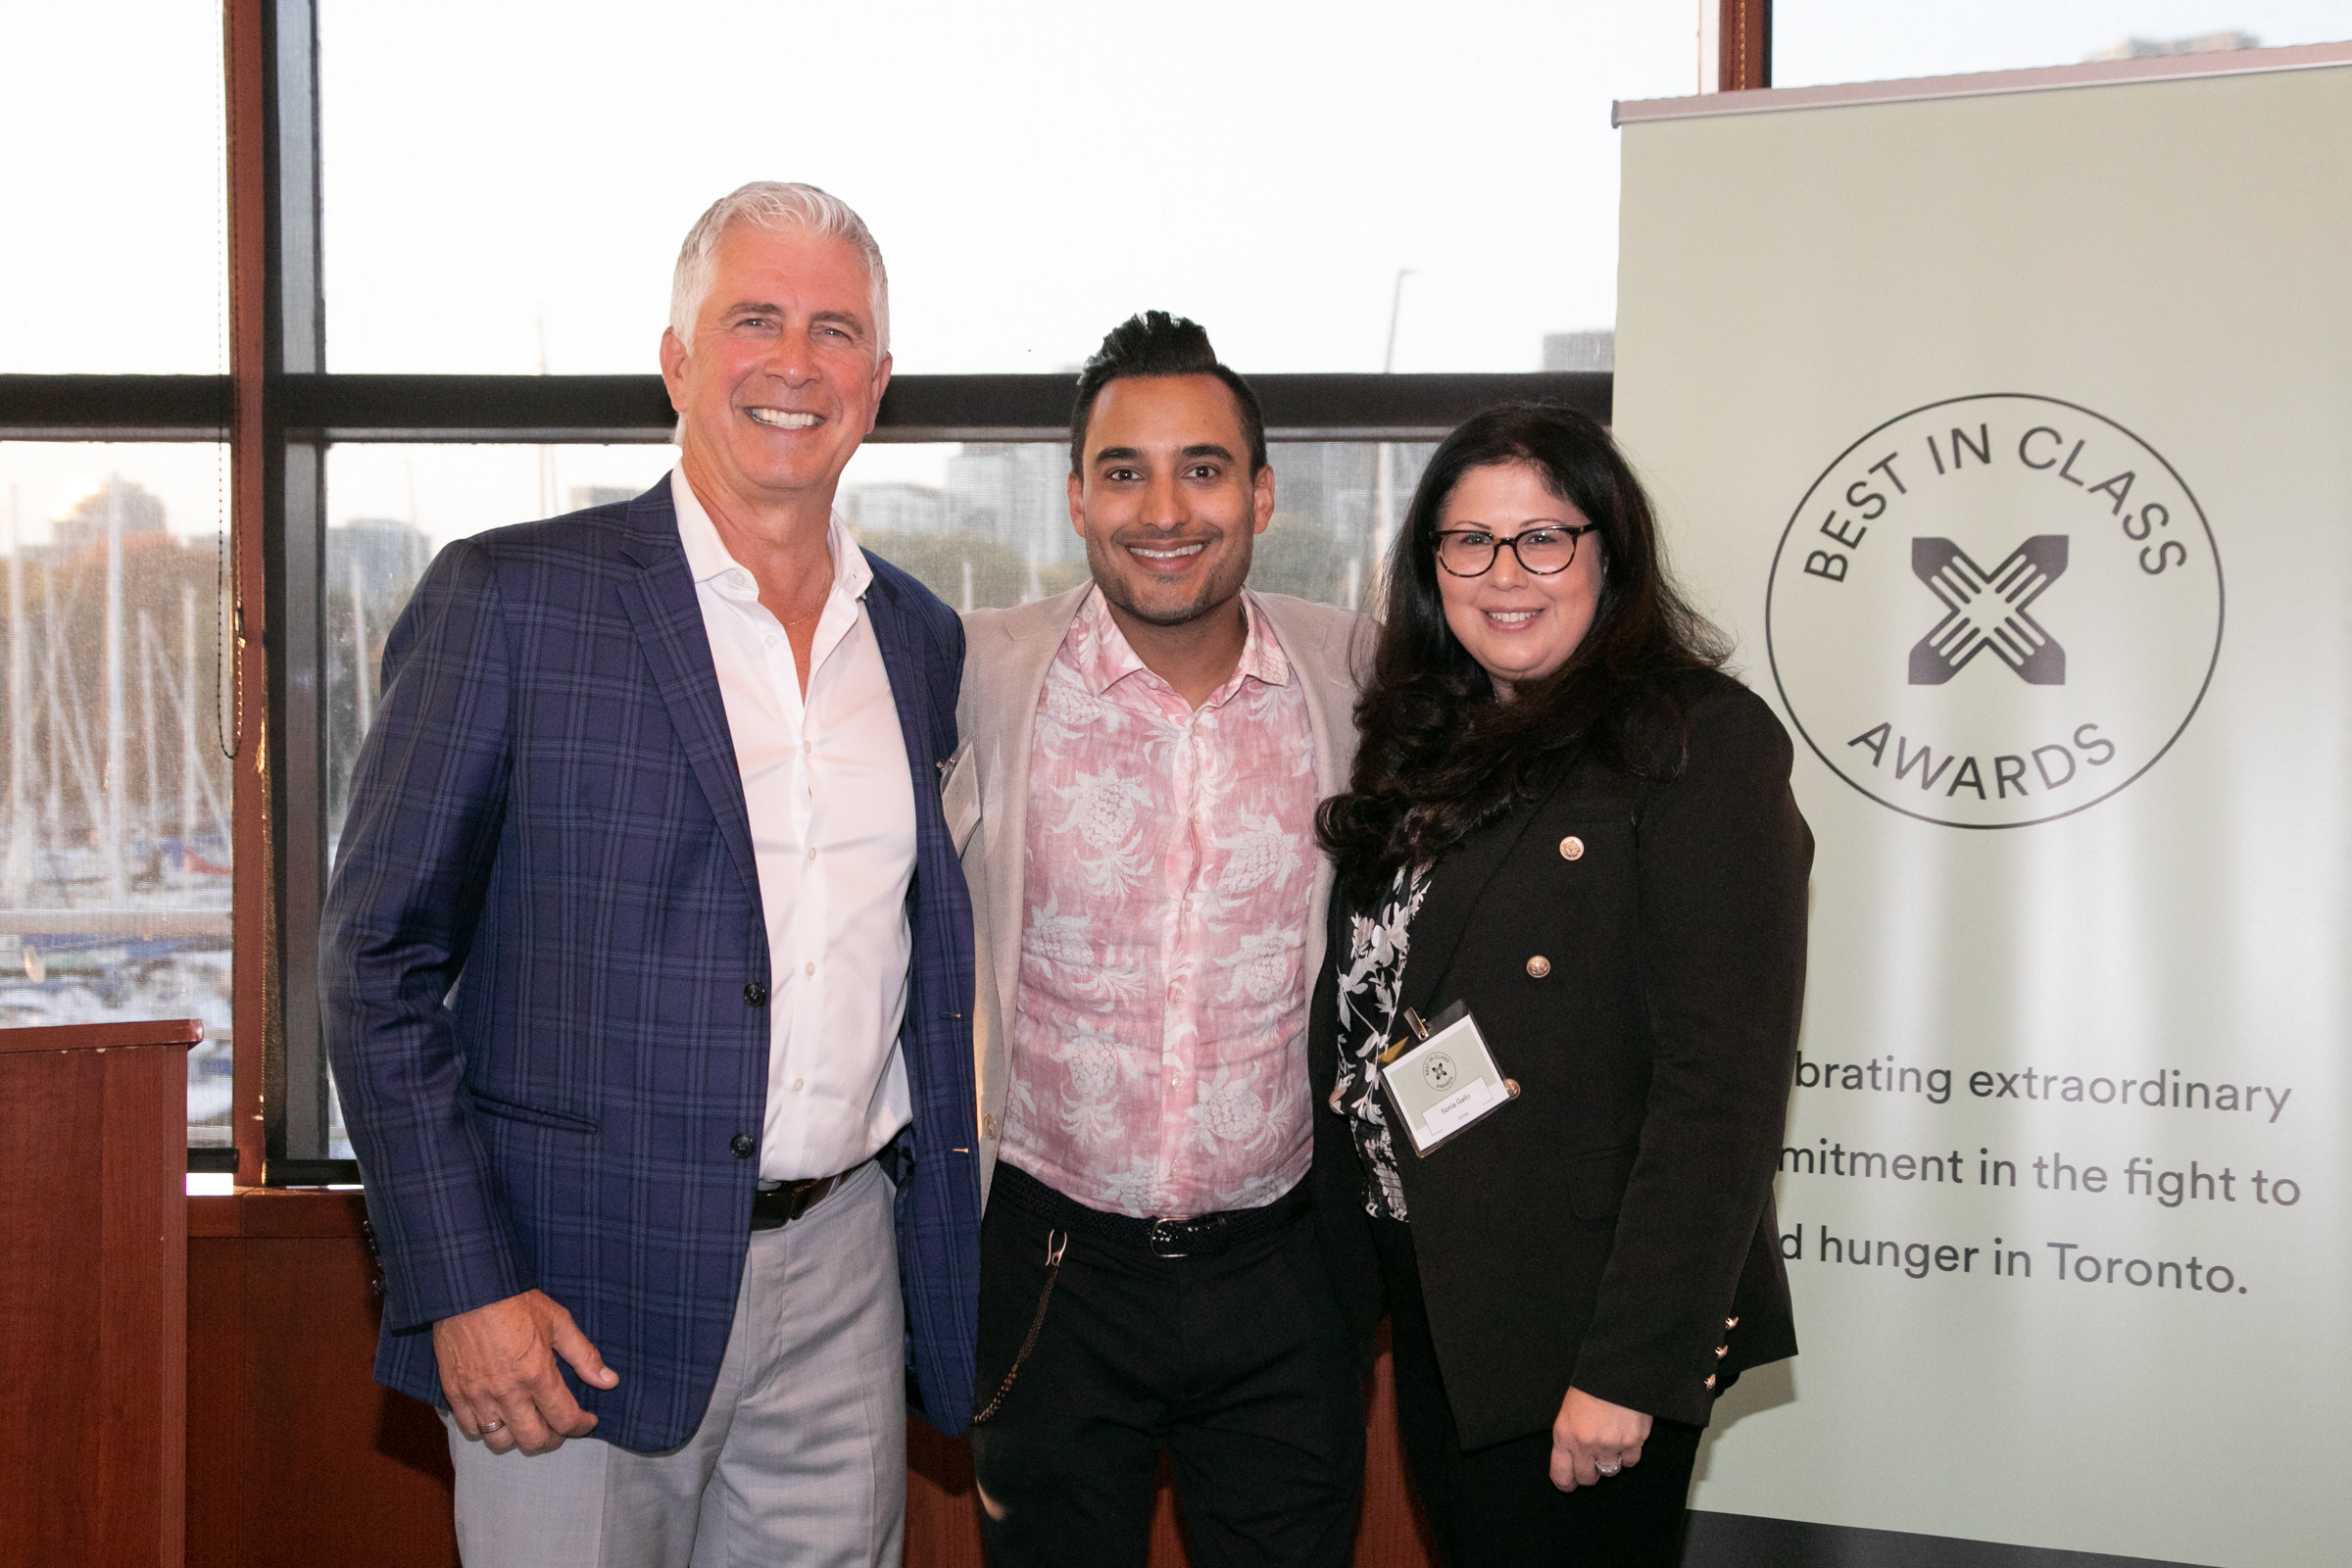 From left: President and CEO, John Sabo, event emcee and radio personality, Gurdeep Ahluwalia, and Director of Communications and Customer Relations, Sonia Gallo at Daily Bread's Best in Class Awards, held at the National Yacht Club, Toronto.